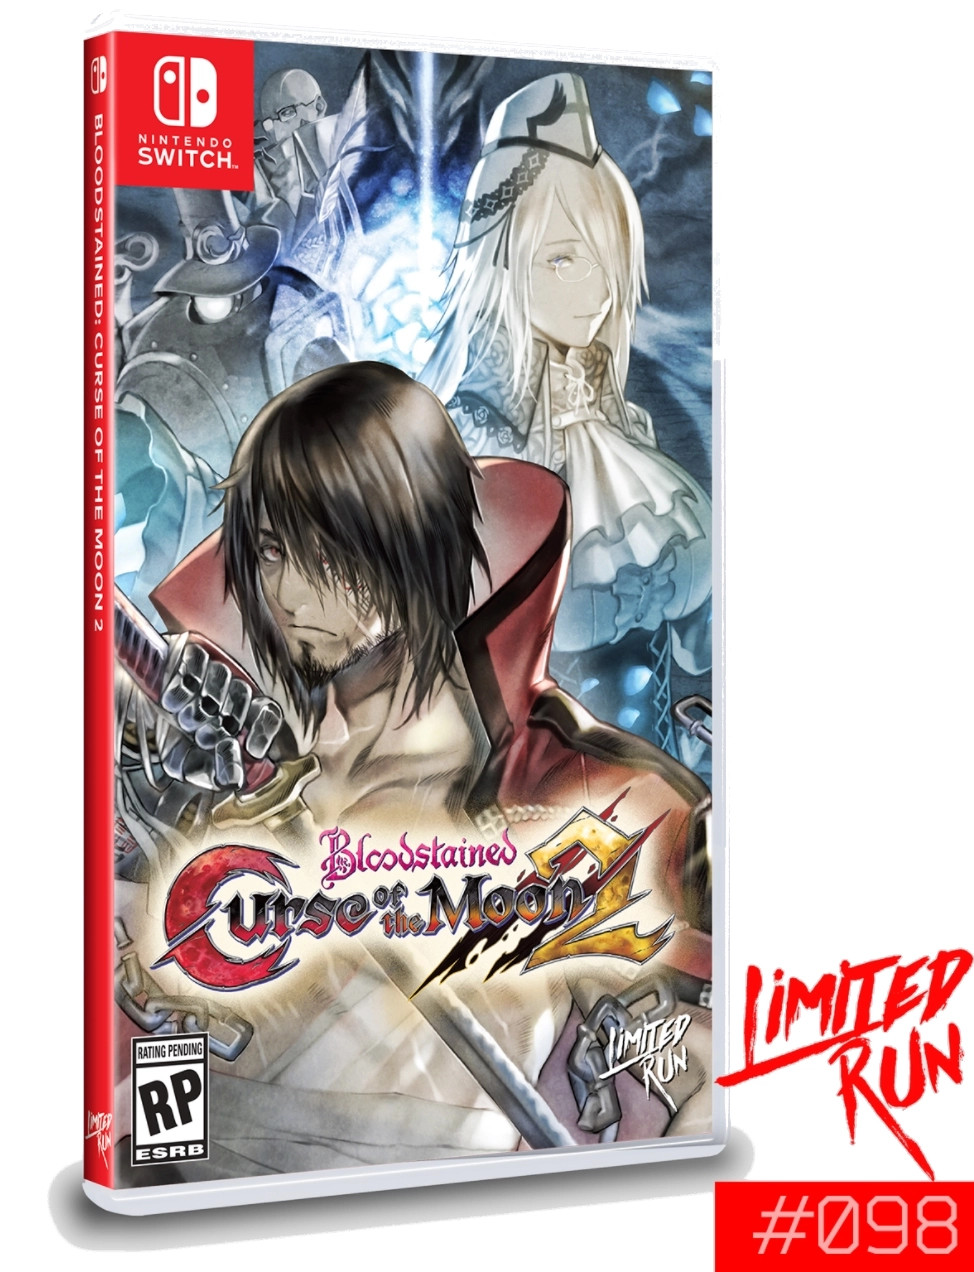 Bloodstained Curse of the Moon 2 (Limited Run Games) - Nintendo Switch